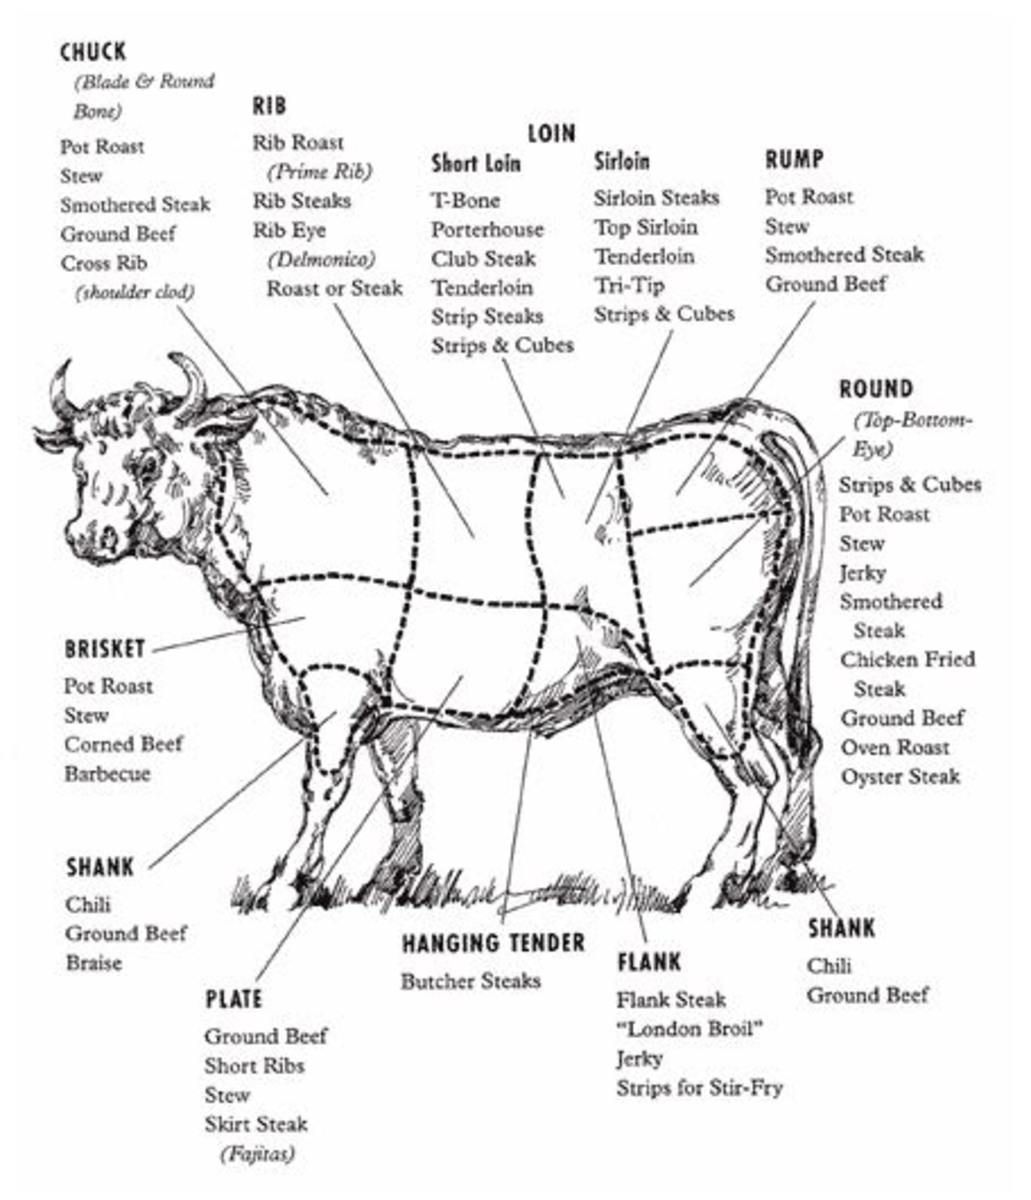 The brisket is from the front part of the cow.